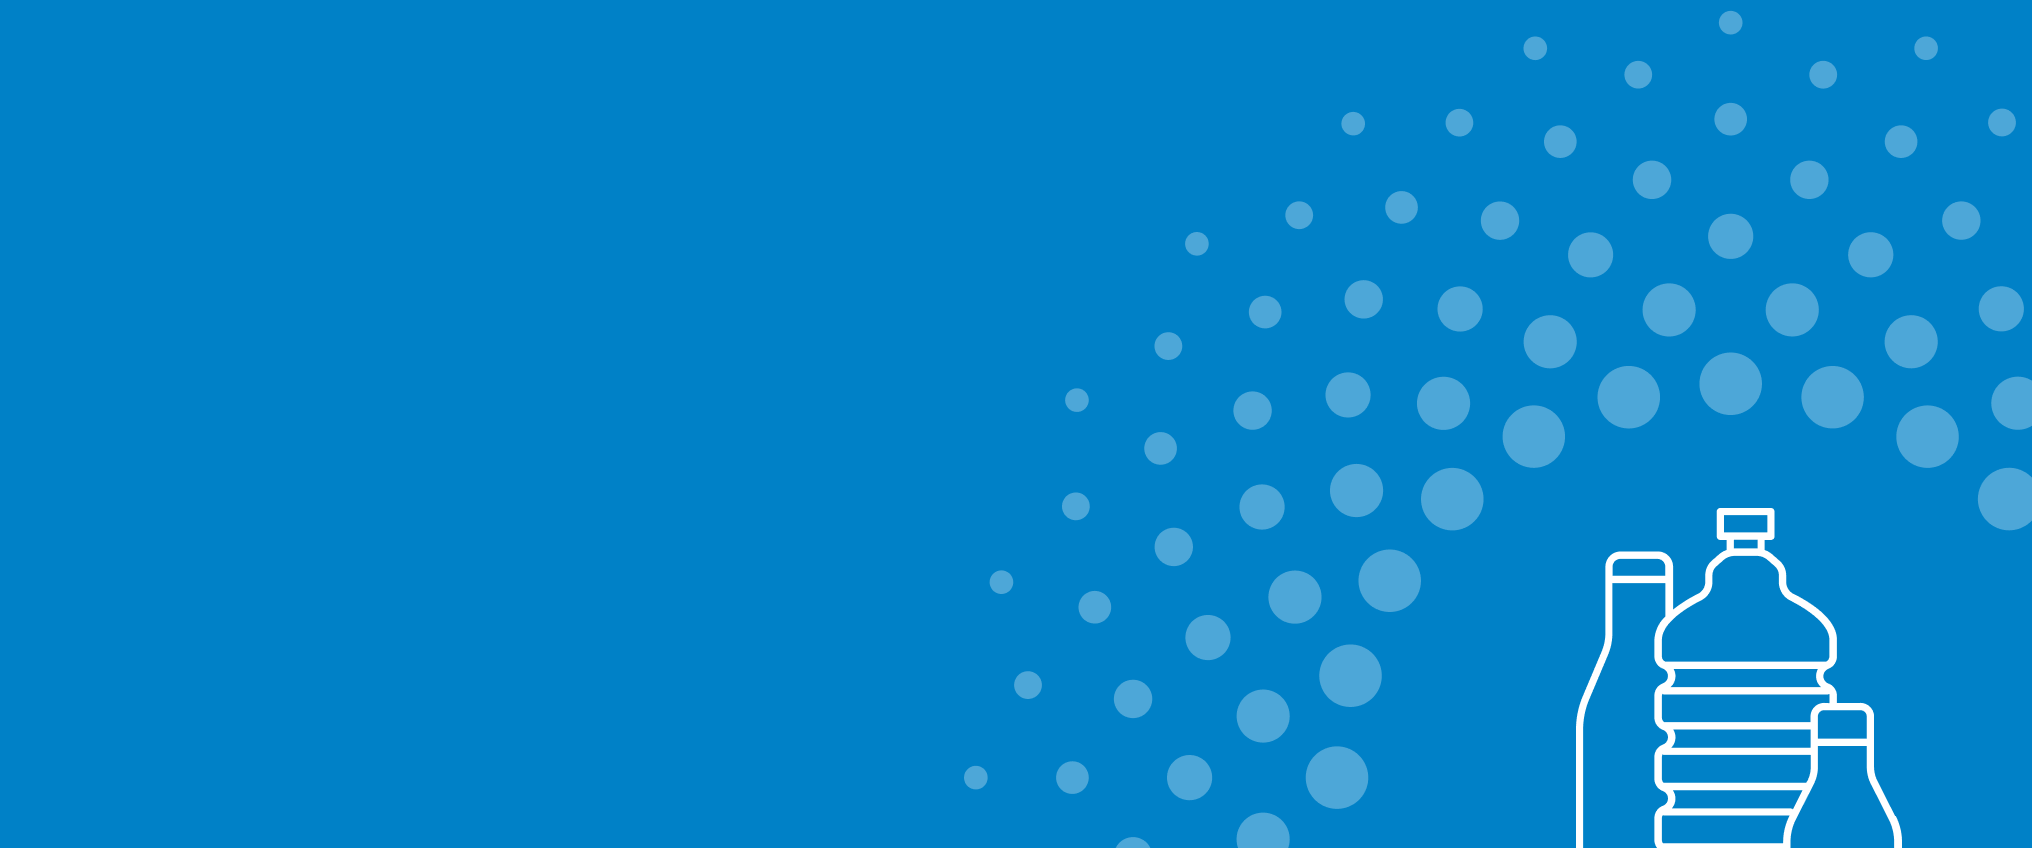 dots on blue background with plastic packaging illustration